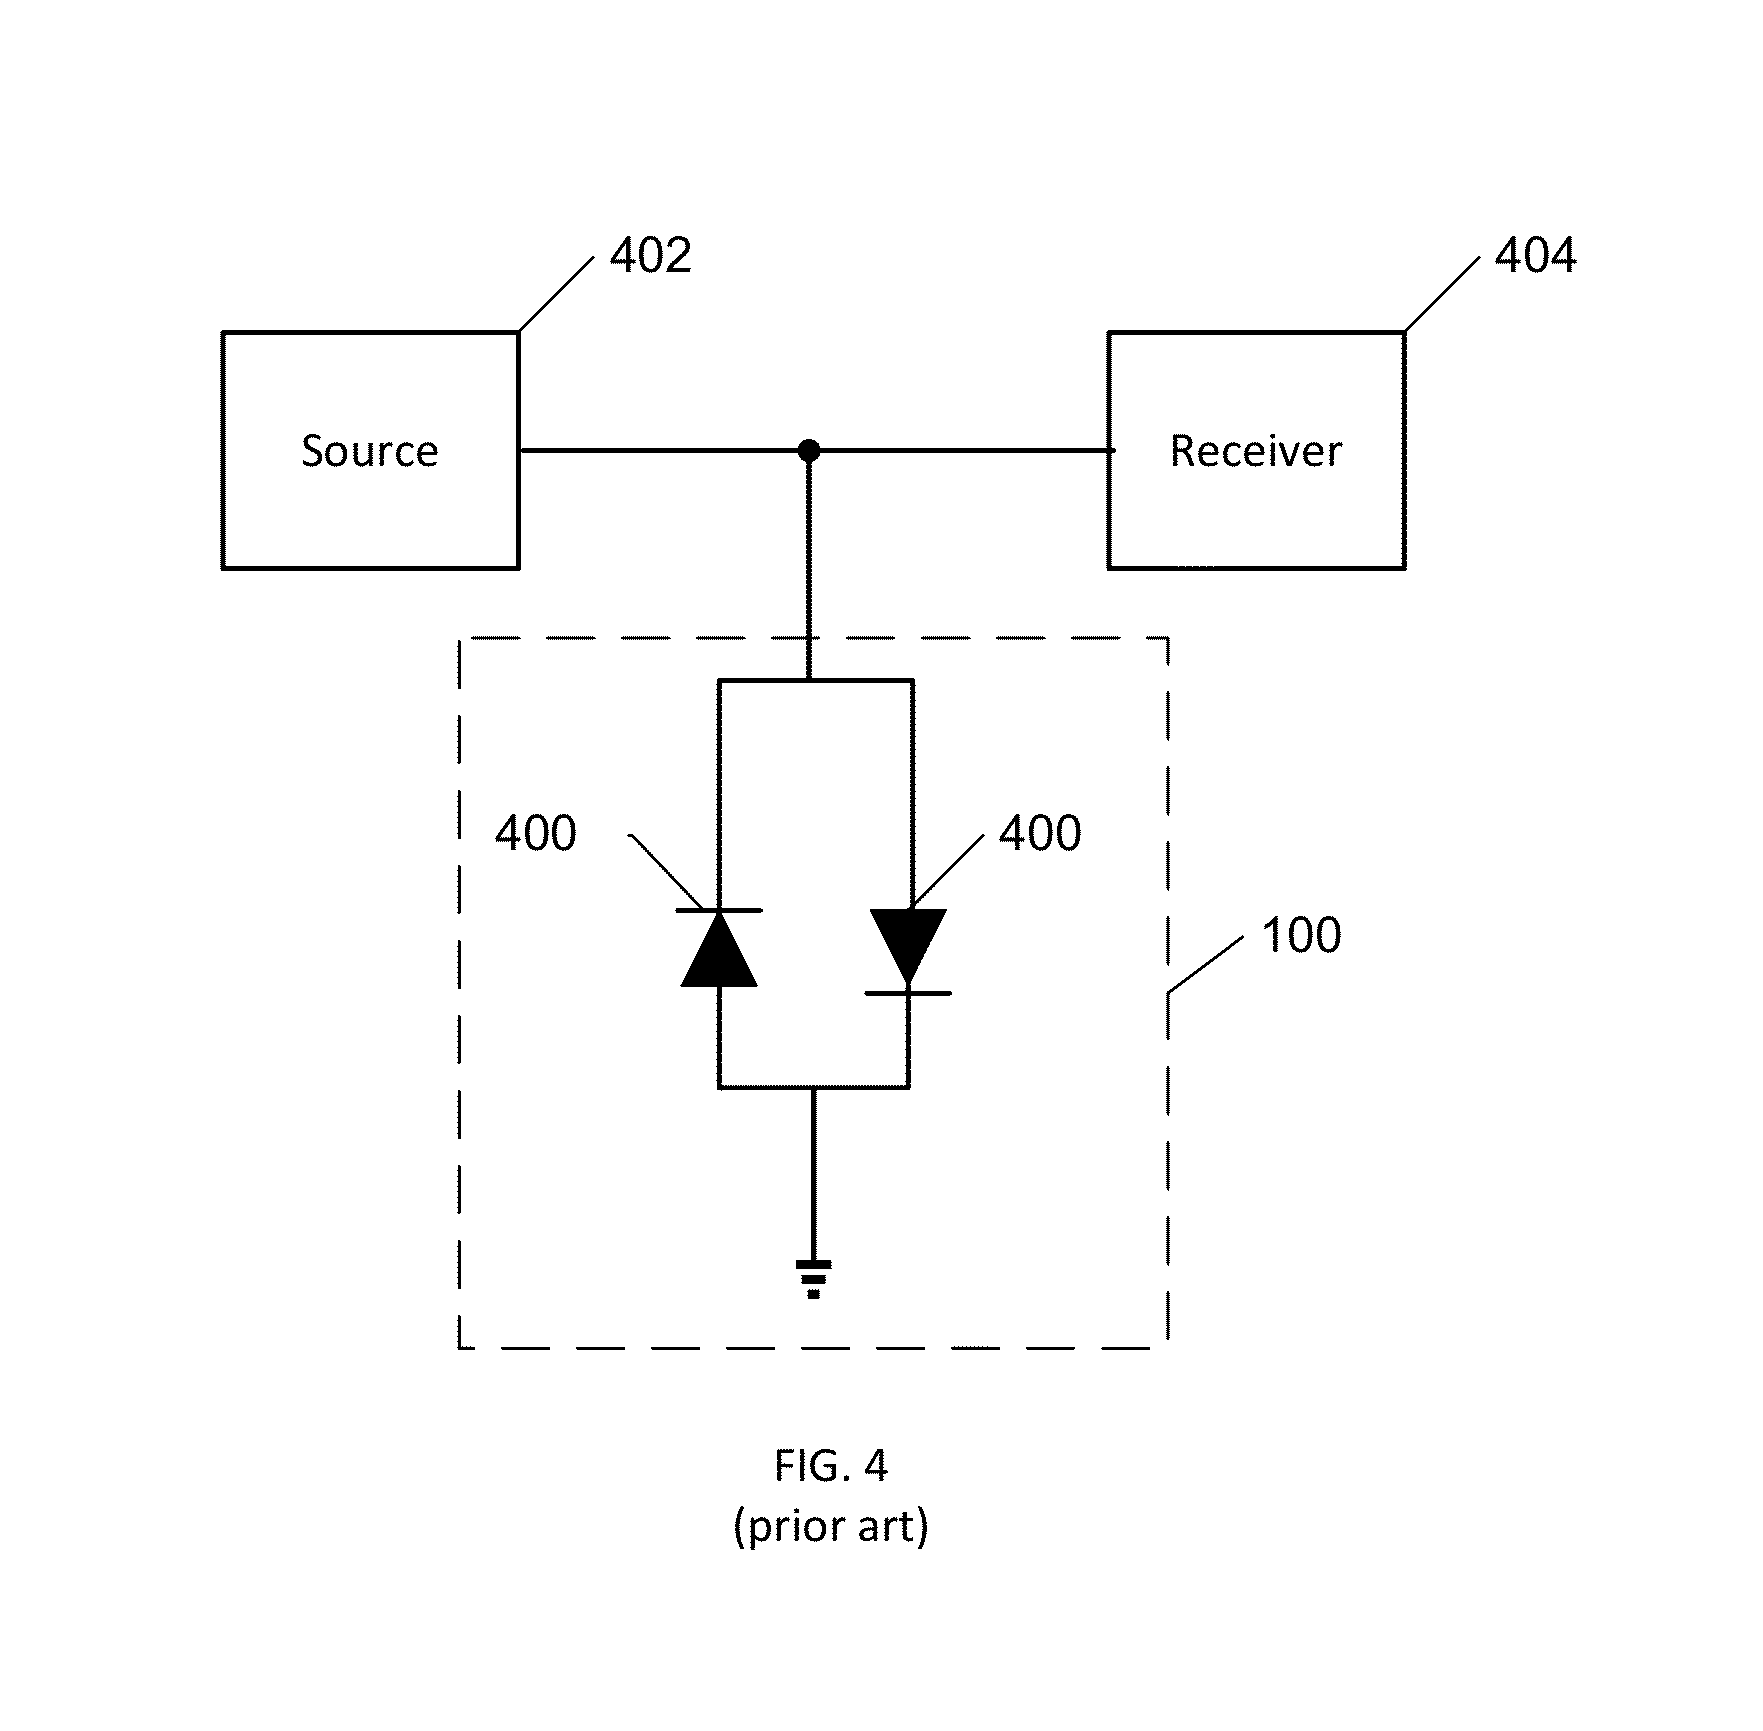 Self-activating adjustable power limiter